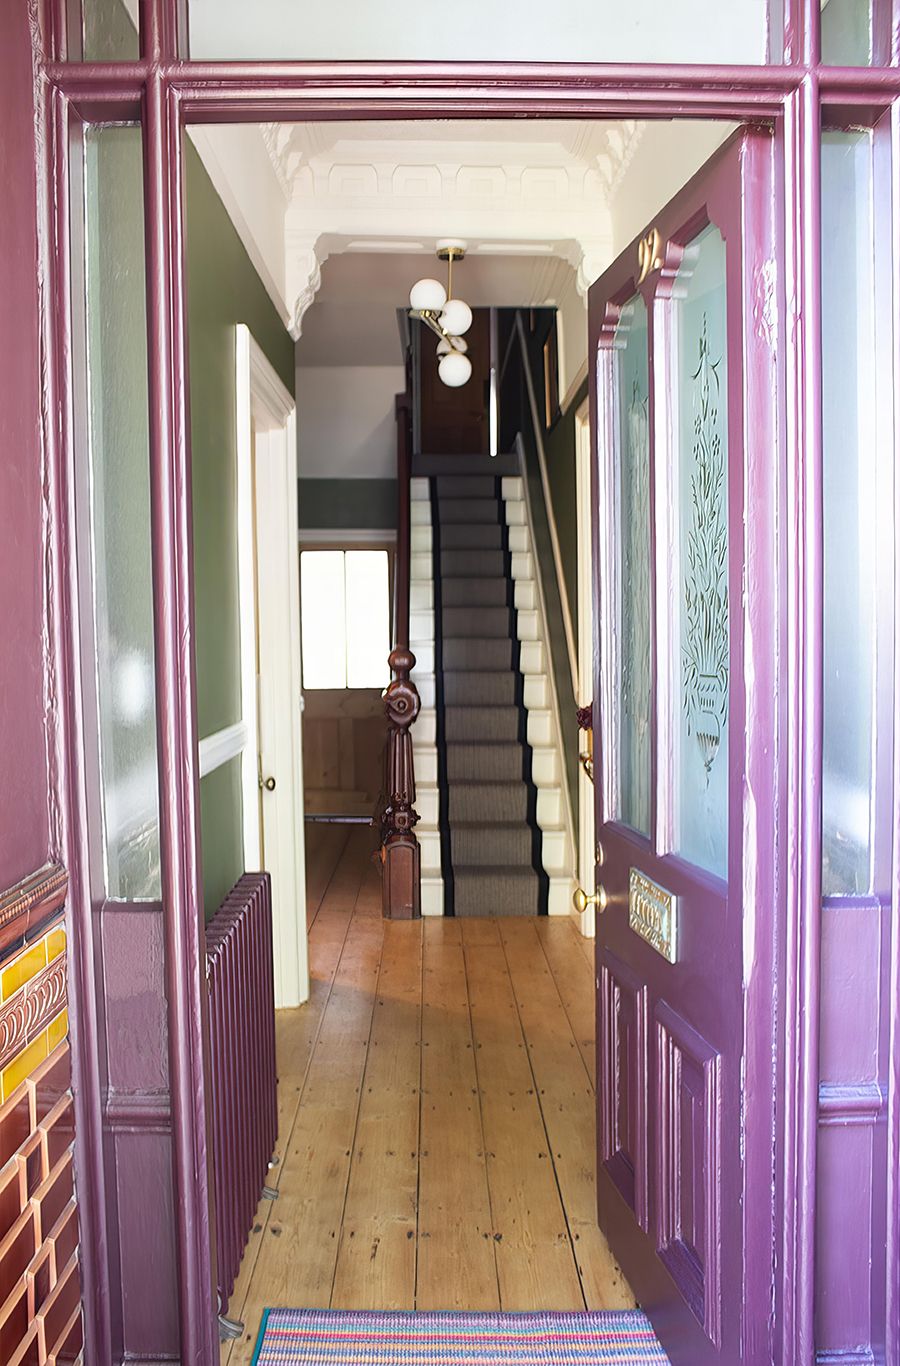 A photo showing the front door open, through to the hallway.